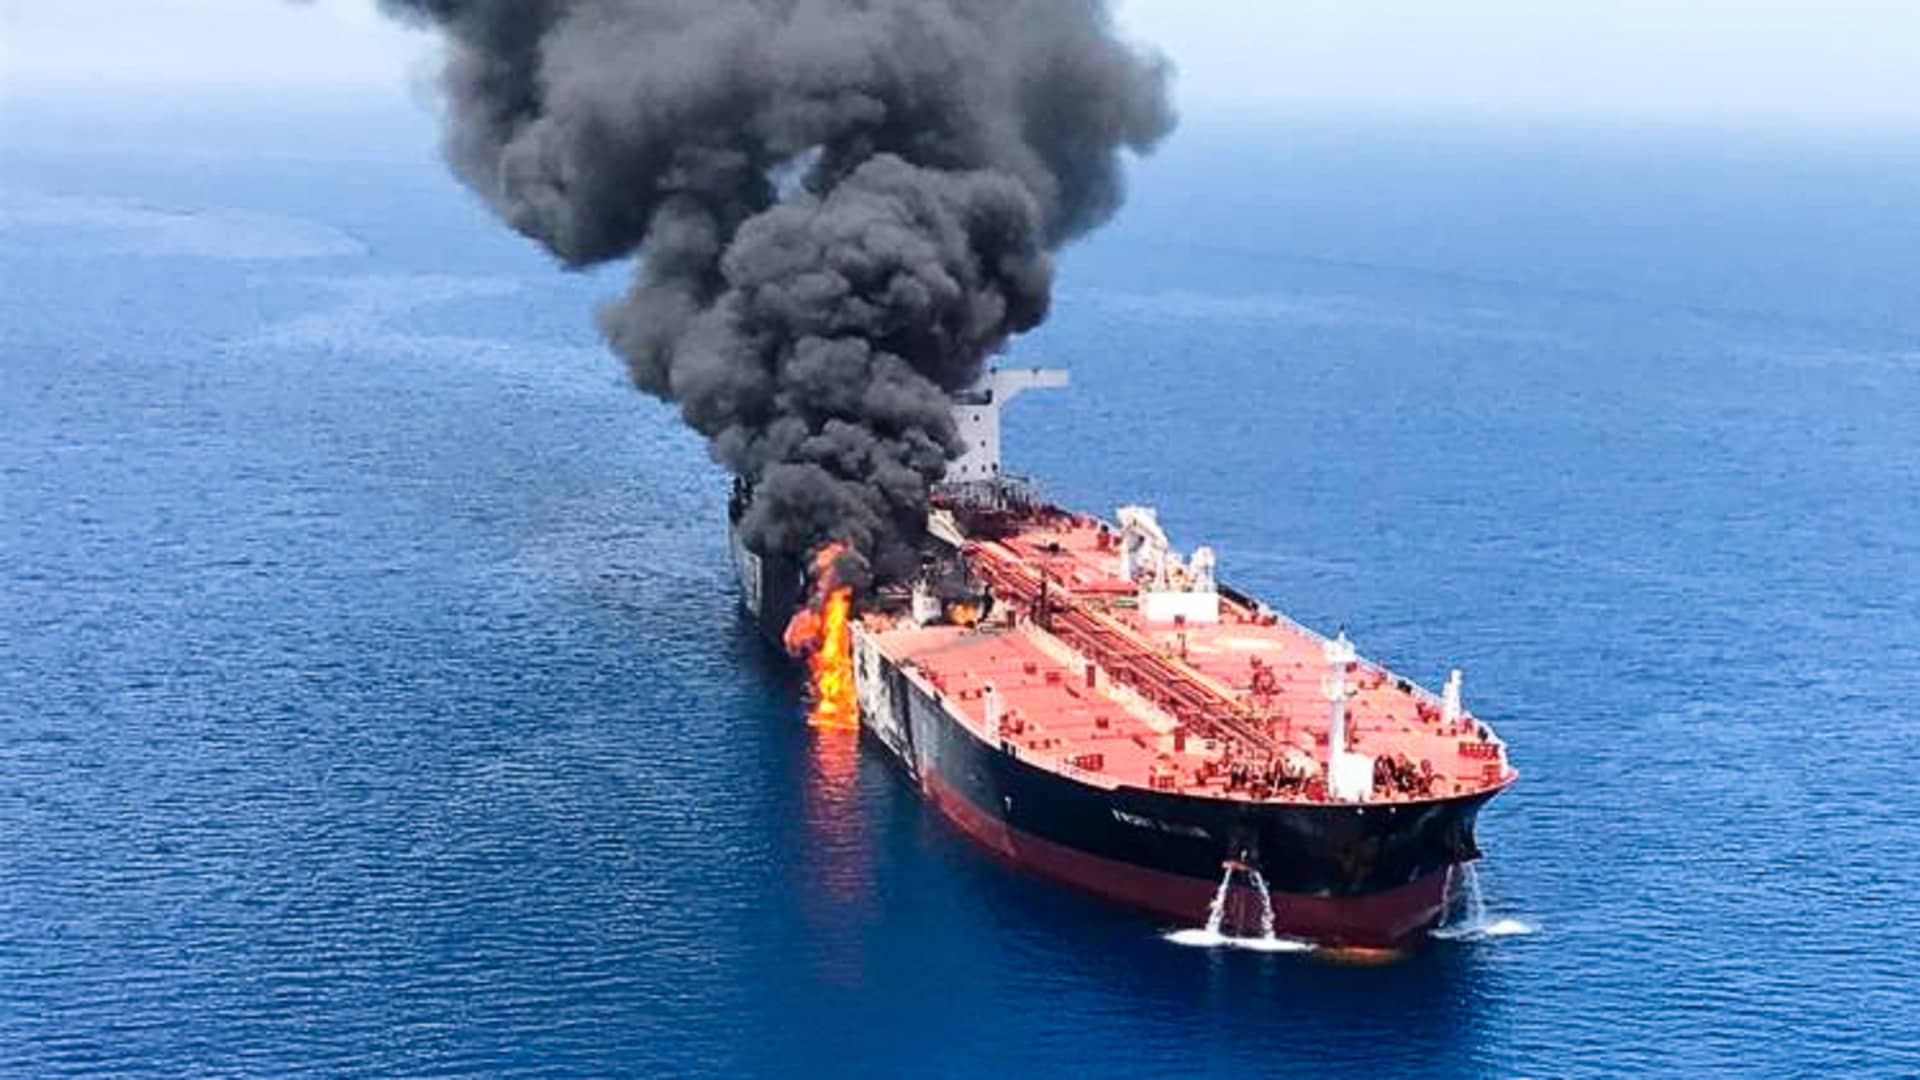 Oil jumps on reports of tanker attacks in Gulf of Oman off Iran coast